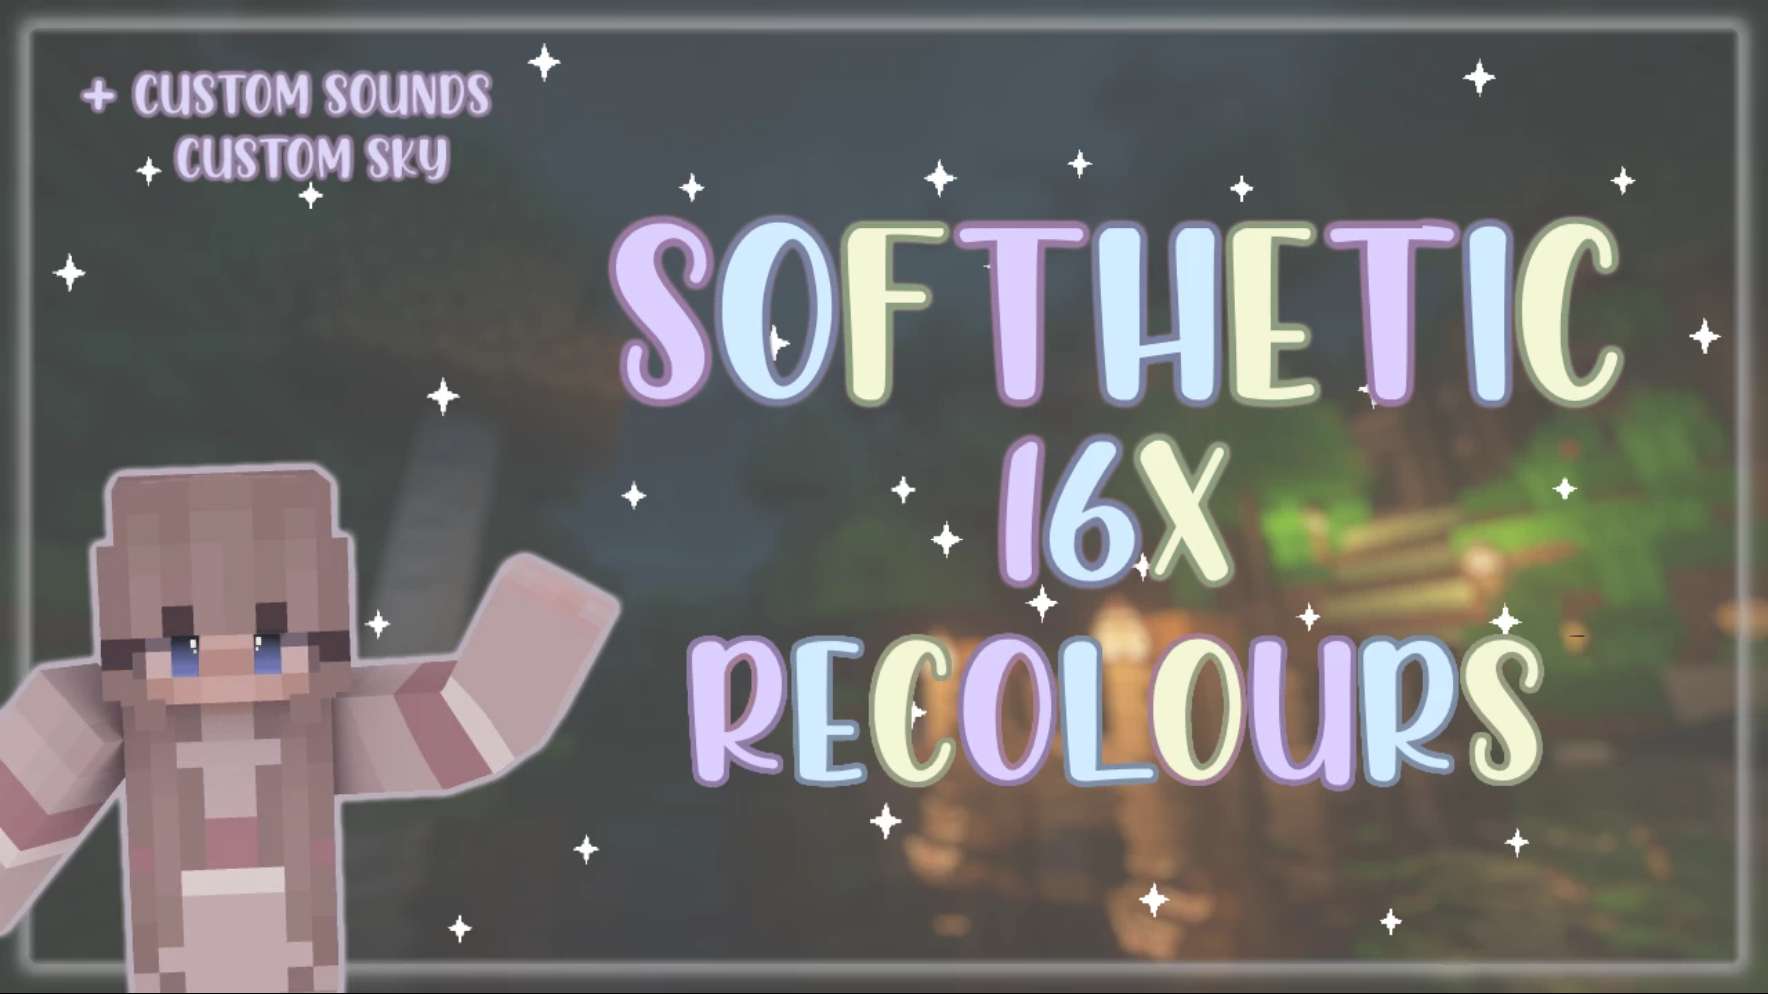 Softhetic 16x (Pink) 16 by ohgabie on PvPRP